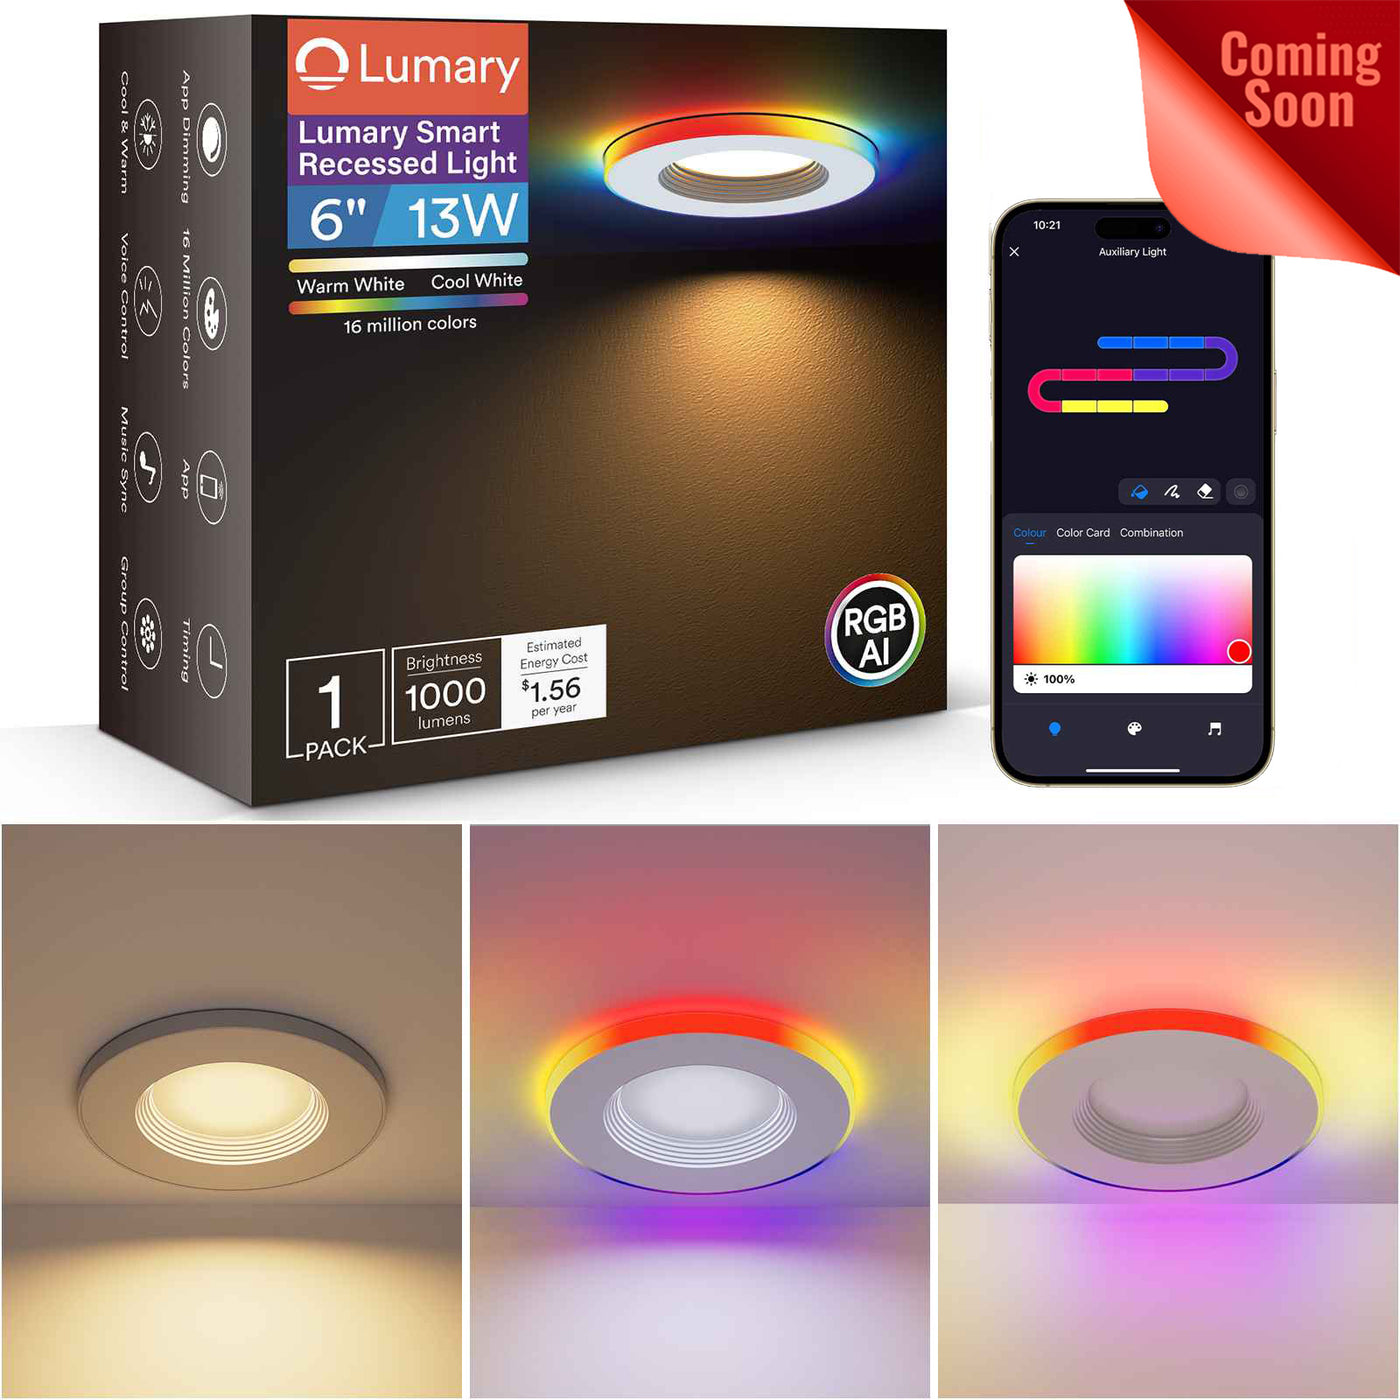 Lumary Smart RGBAI Can Light with Gradient Accent Night Light 6 inch 13W 1000lm